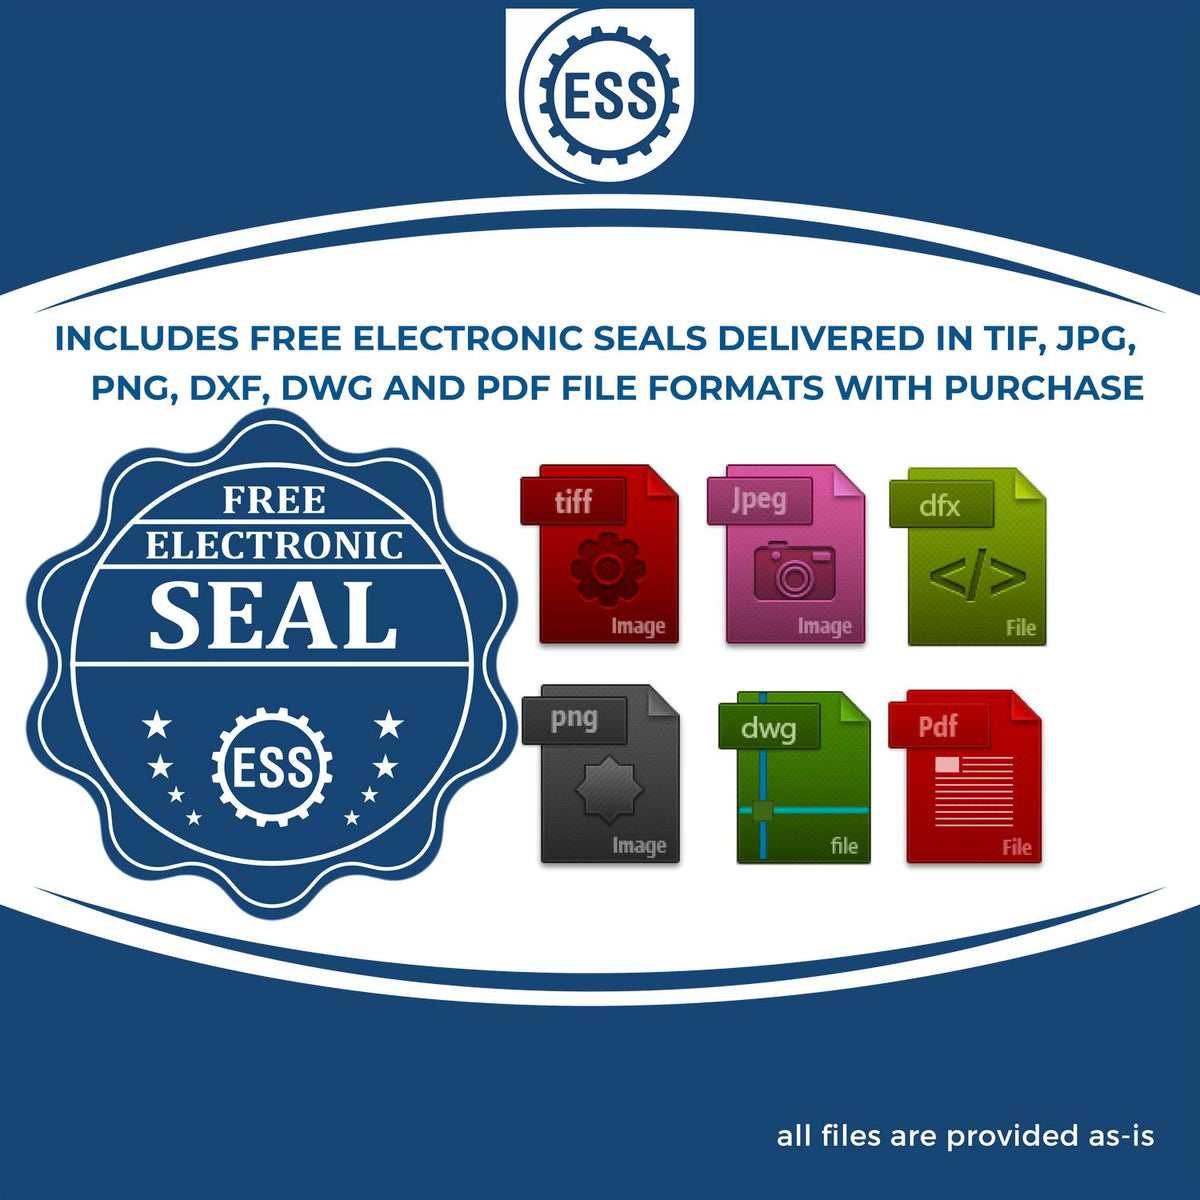 An infographic for the free electronic seal for the Handheld Kansas Land Surveyor Seal illustrating the different file type icons such as DXF, DWG, TIF, JPG and PNG.